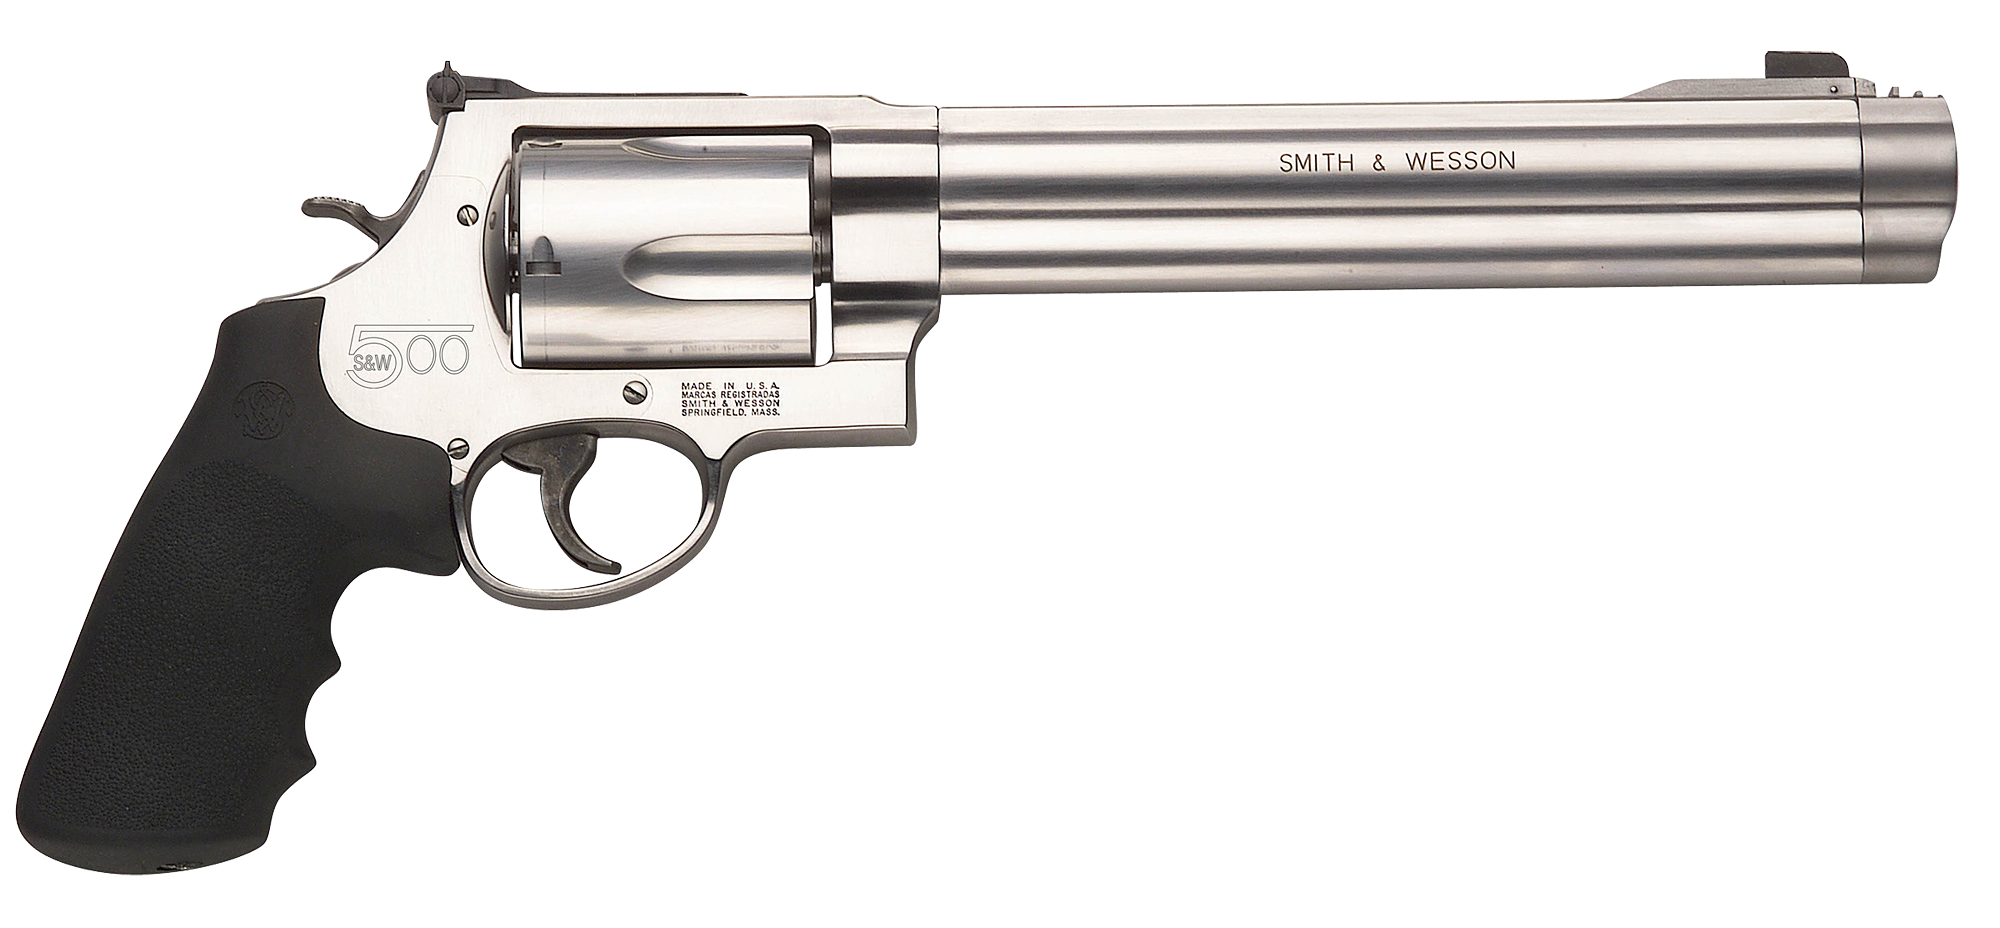 Smith  Wesson Model SW500 DoubleAction Revolver